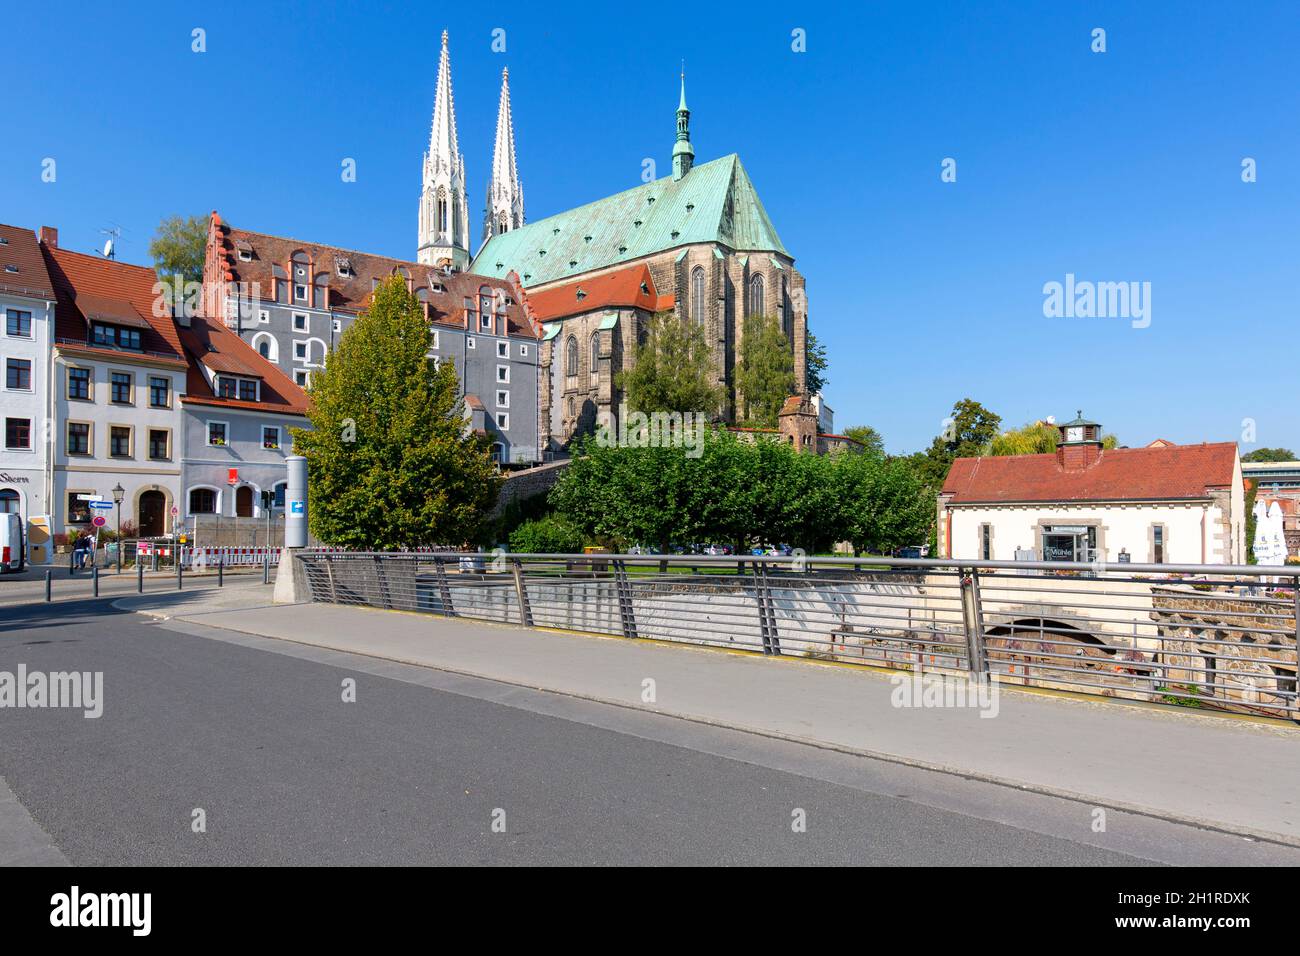 Goerlitz, Germany - September 22, 2020 : Lutheran Peterskirche (Church of St. Peter and Paul) on Lusatian Neisse river, Old Town Bridge between Poland Stock Photo